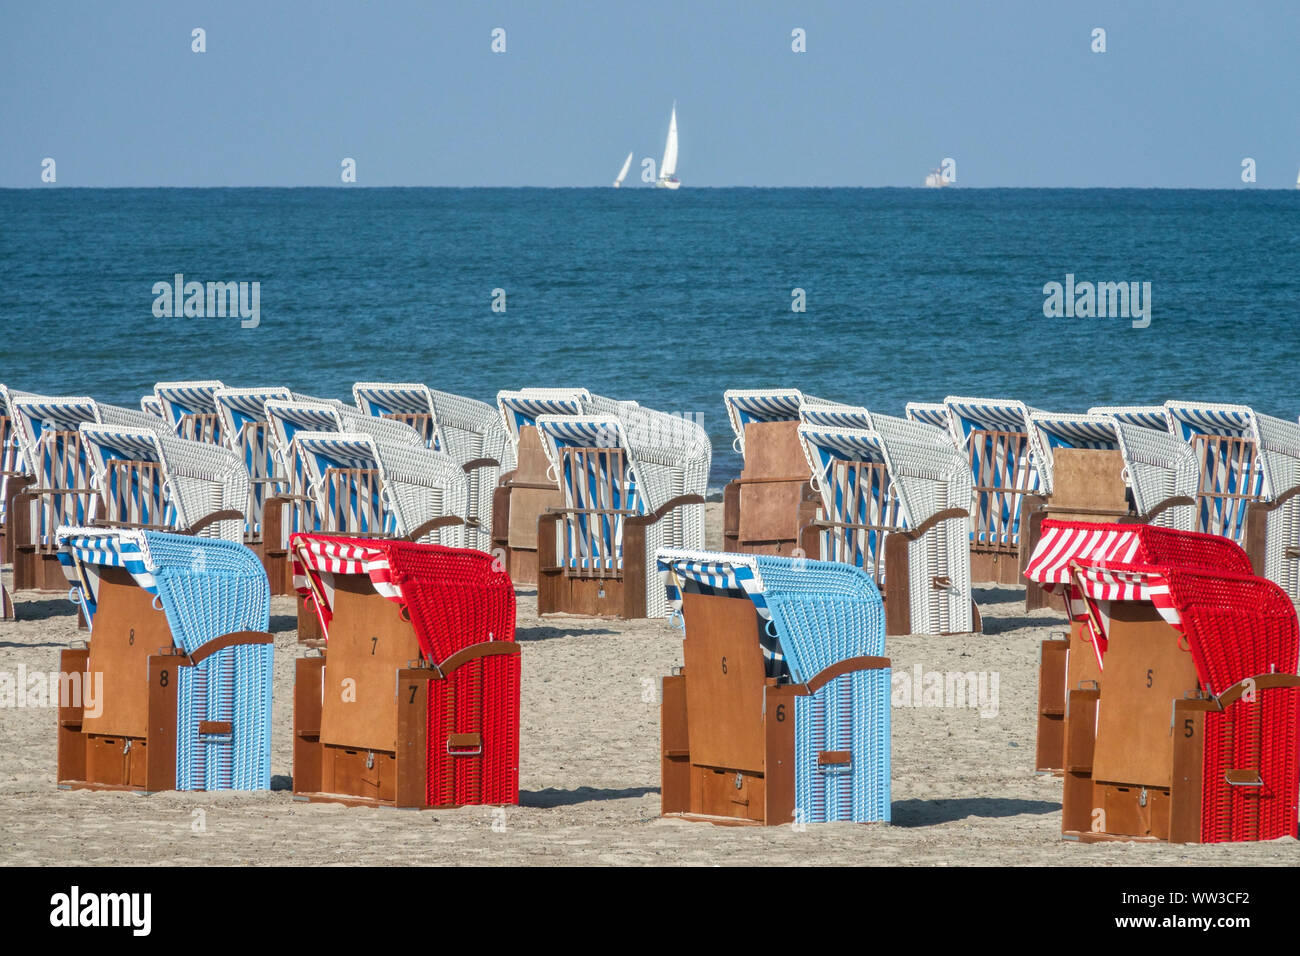 Strandkorb Ostsee High Resolution Stock Photography and Images - Alamy